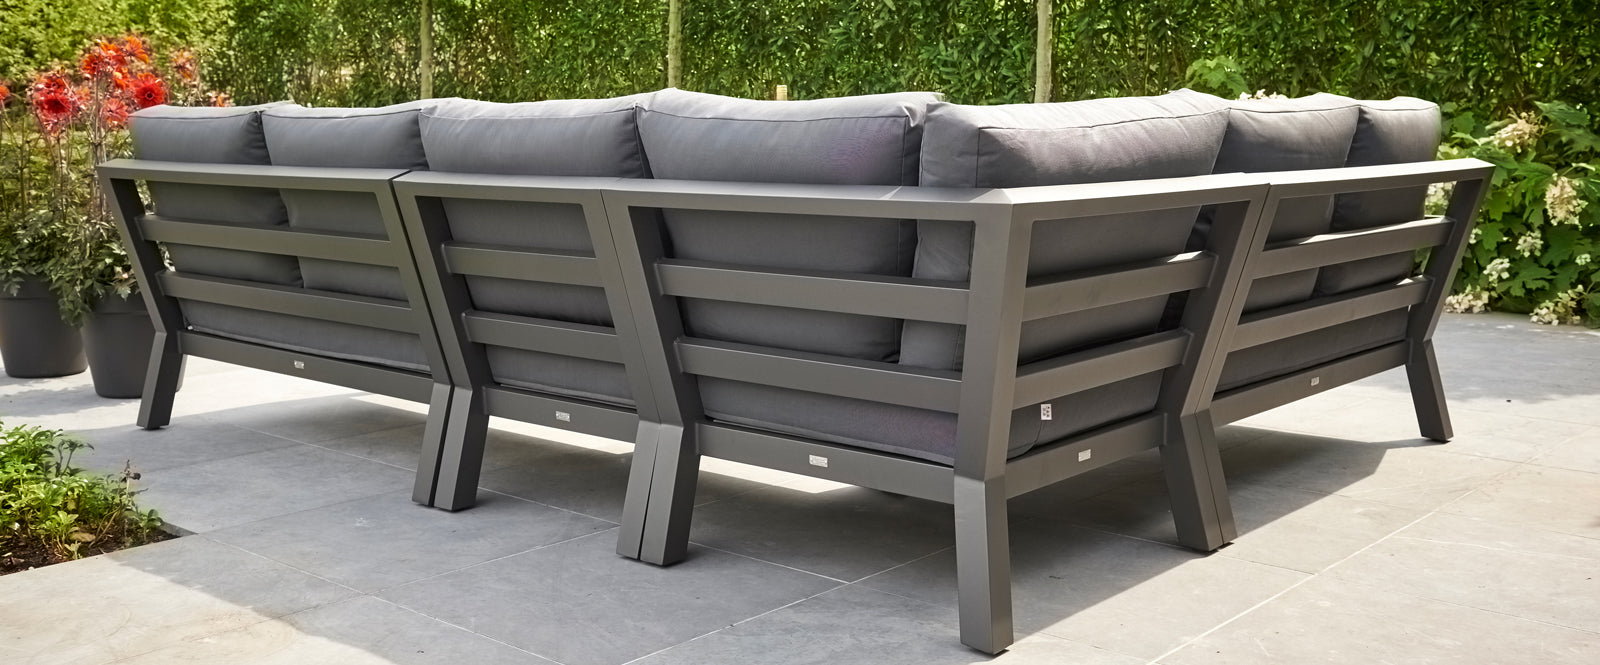 Timber Outdoor Patio Furniture Robust Aluminum Frame Back View